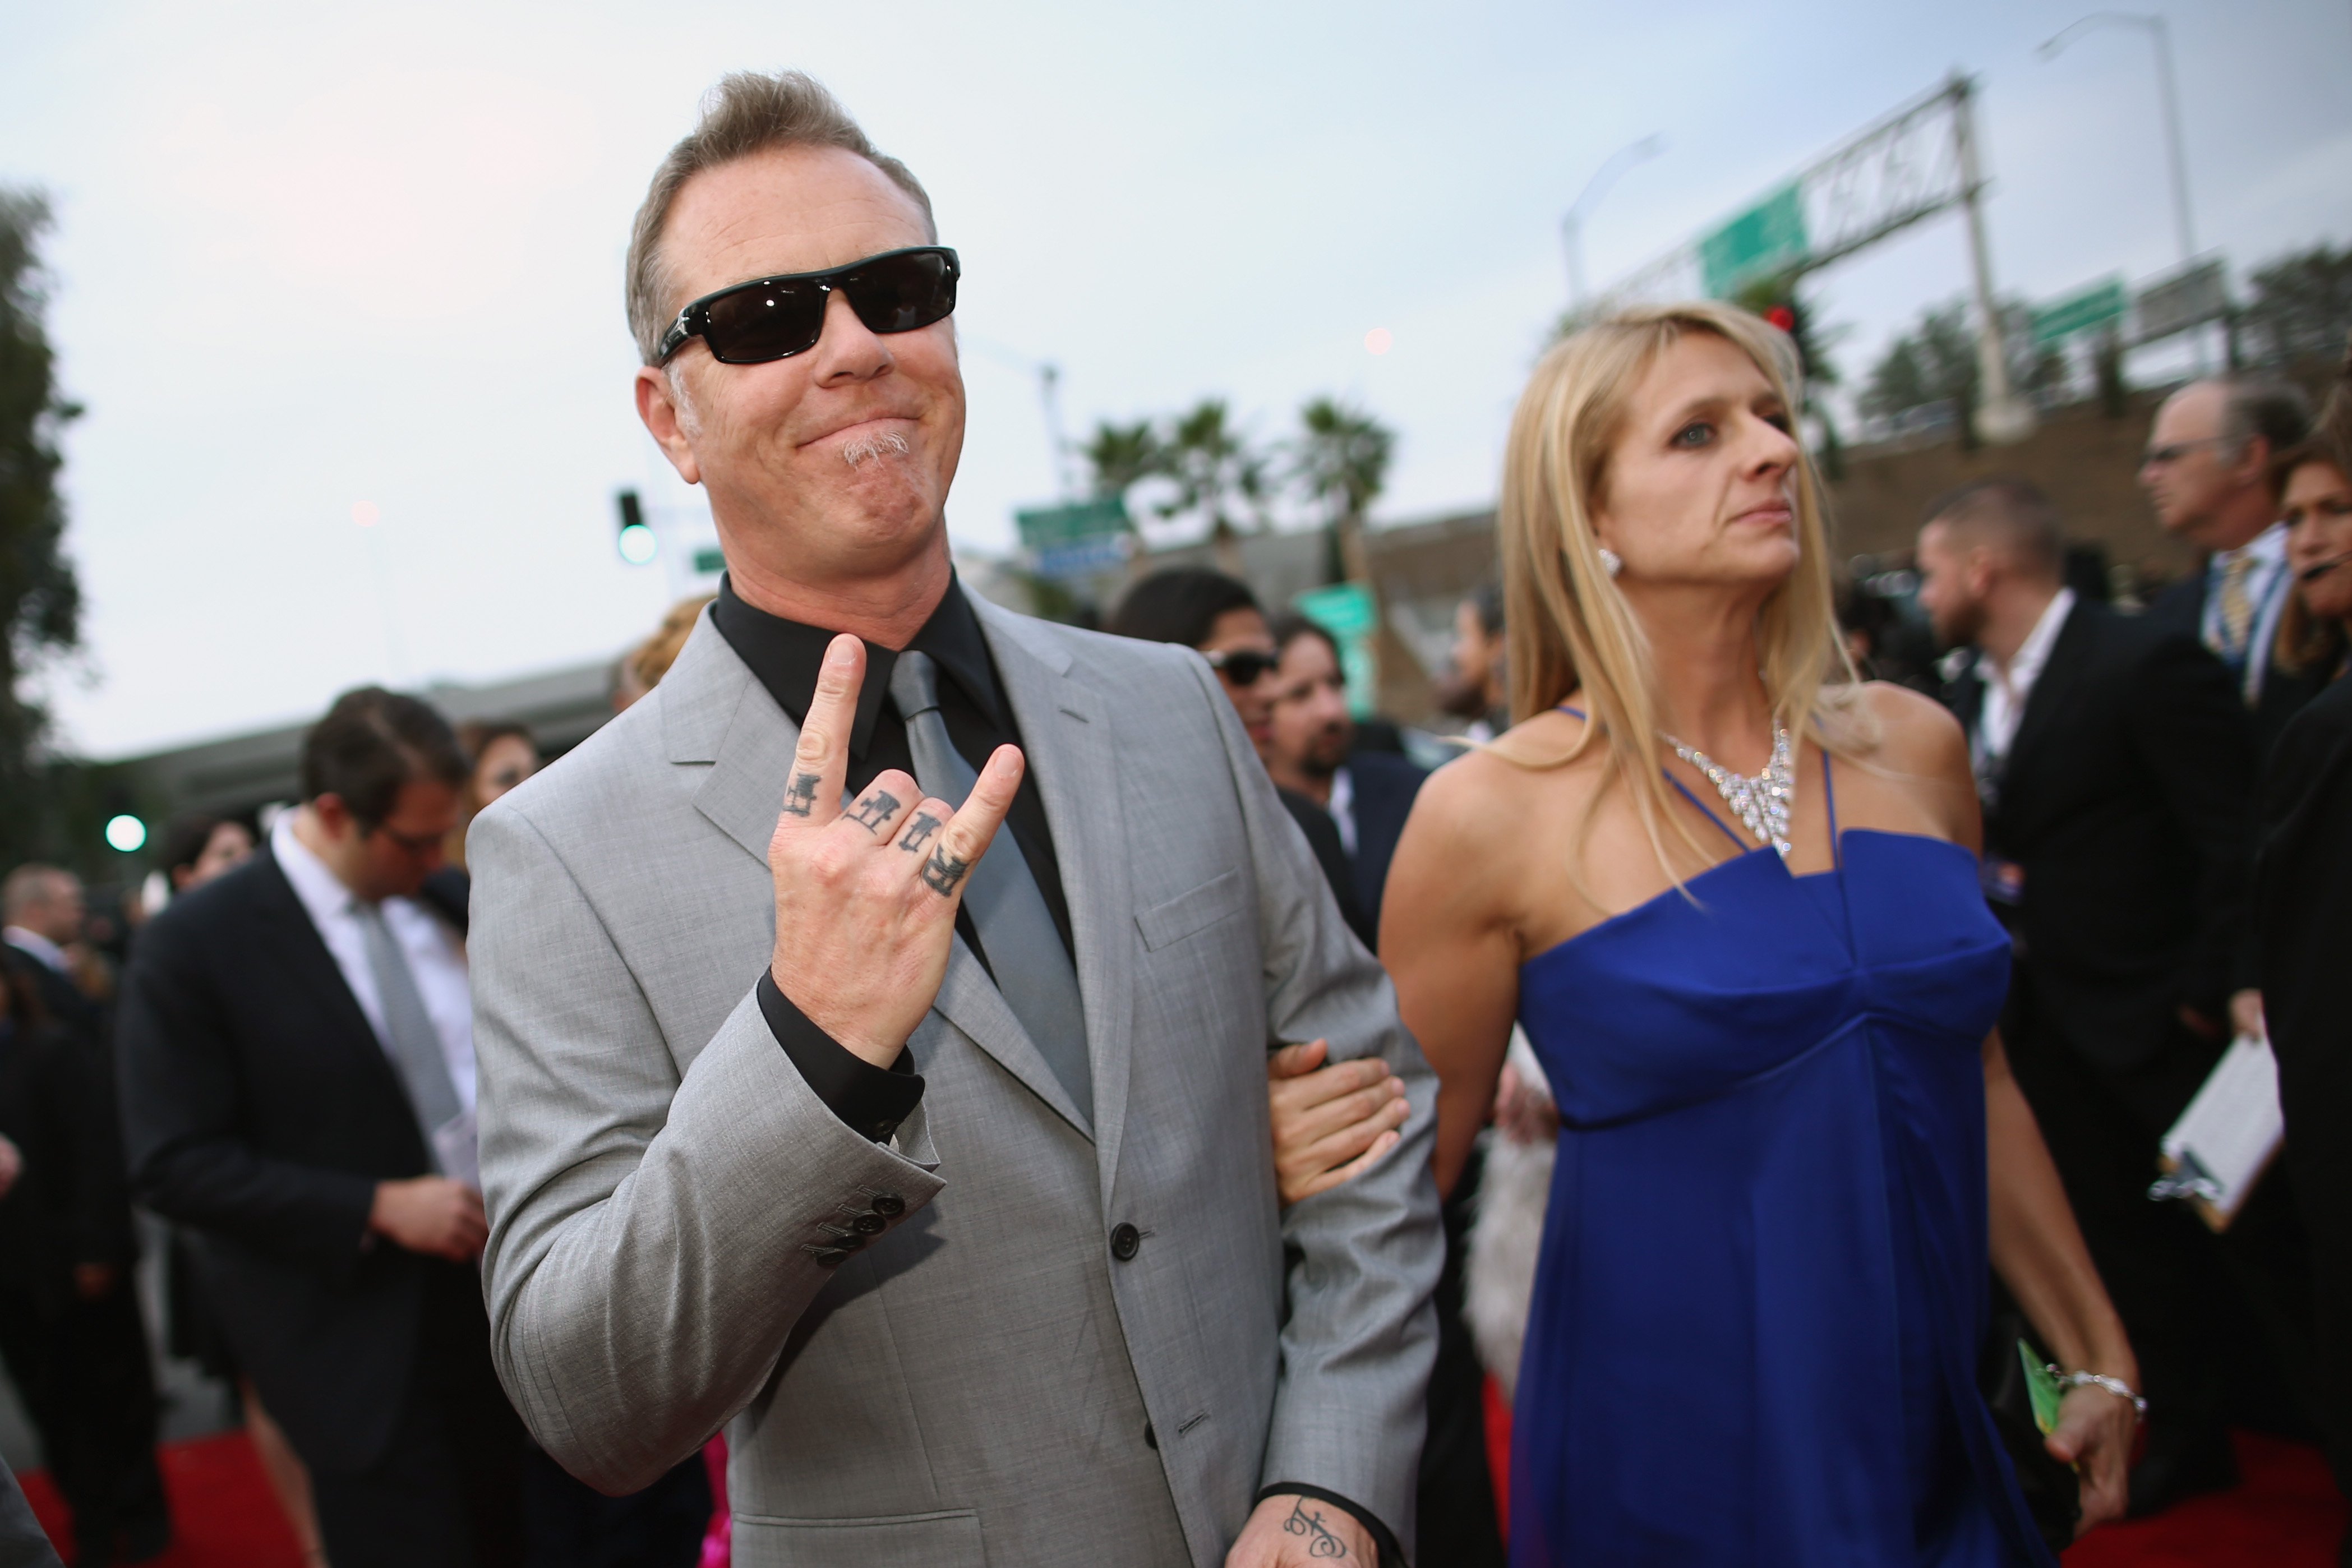 James Hetfield and hsi wife Francesca Hetfield attend the 56th GRAMMY Awards at Staples Center on January 26, 2014, in Los Angeles, California. | Source: Getty Images